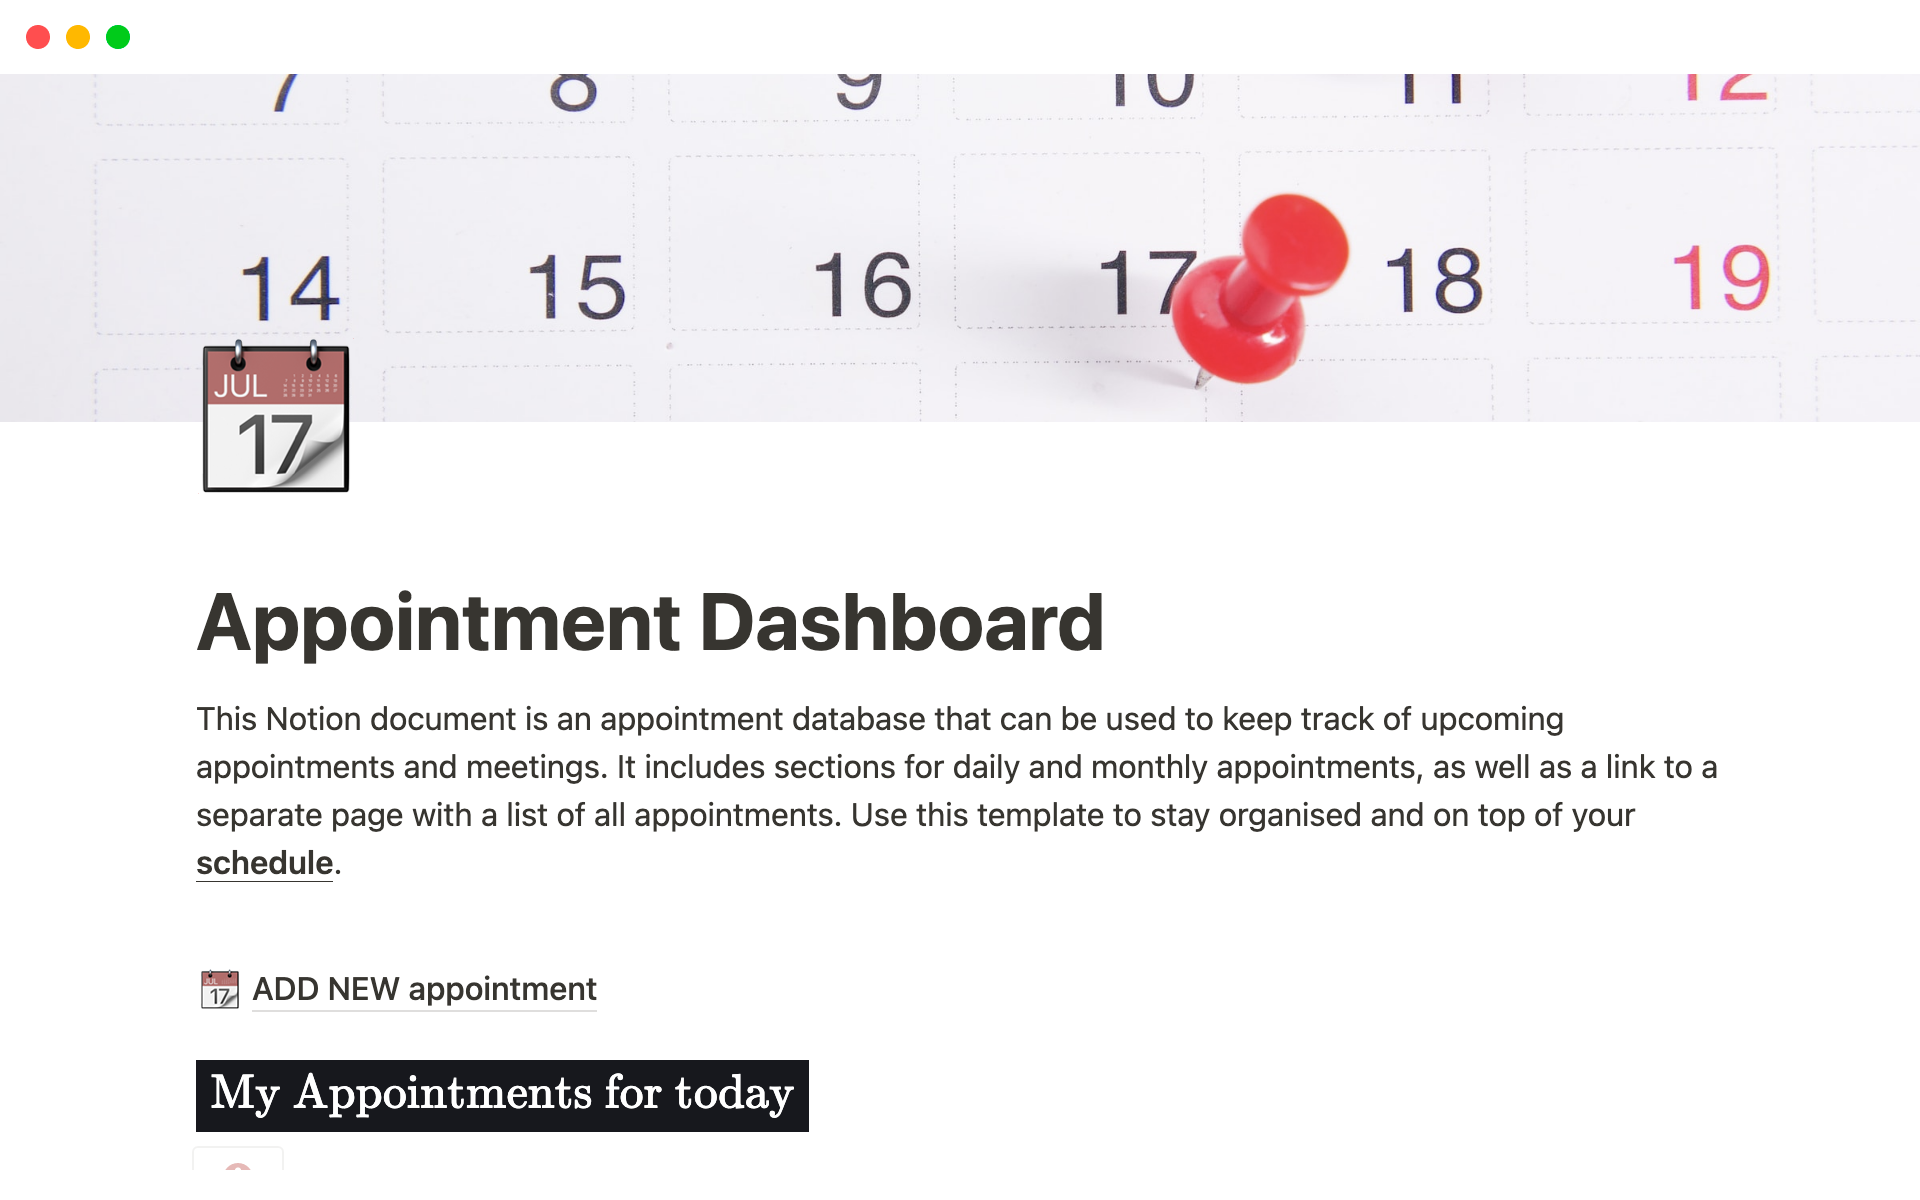 This is an appointment base dashboard and easy managing appointments